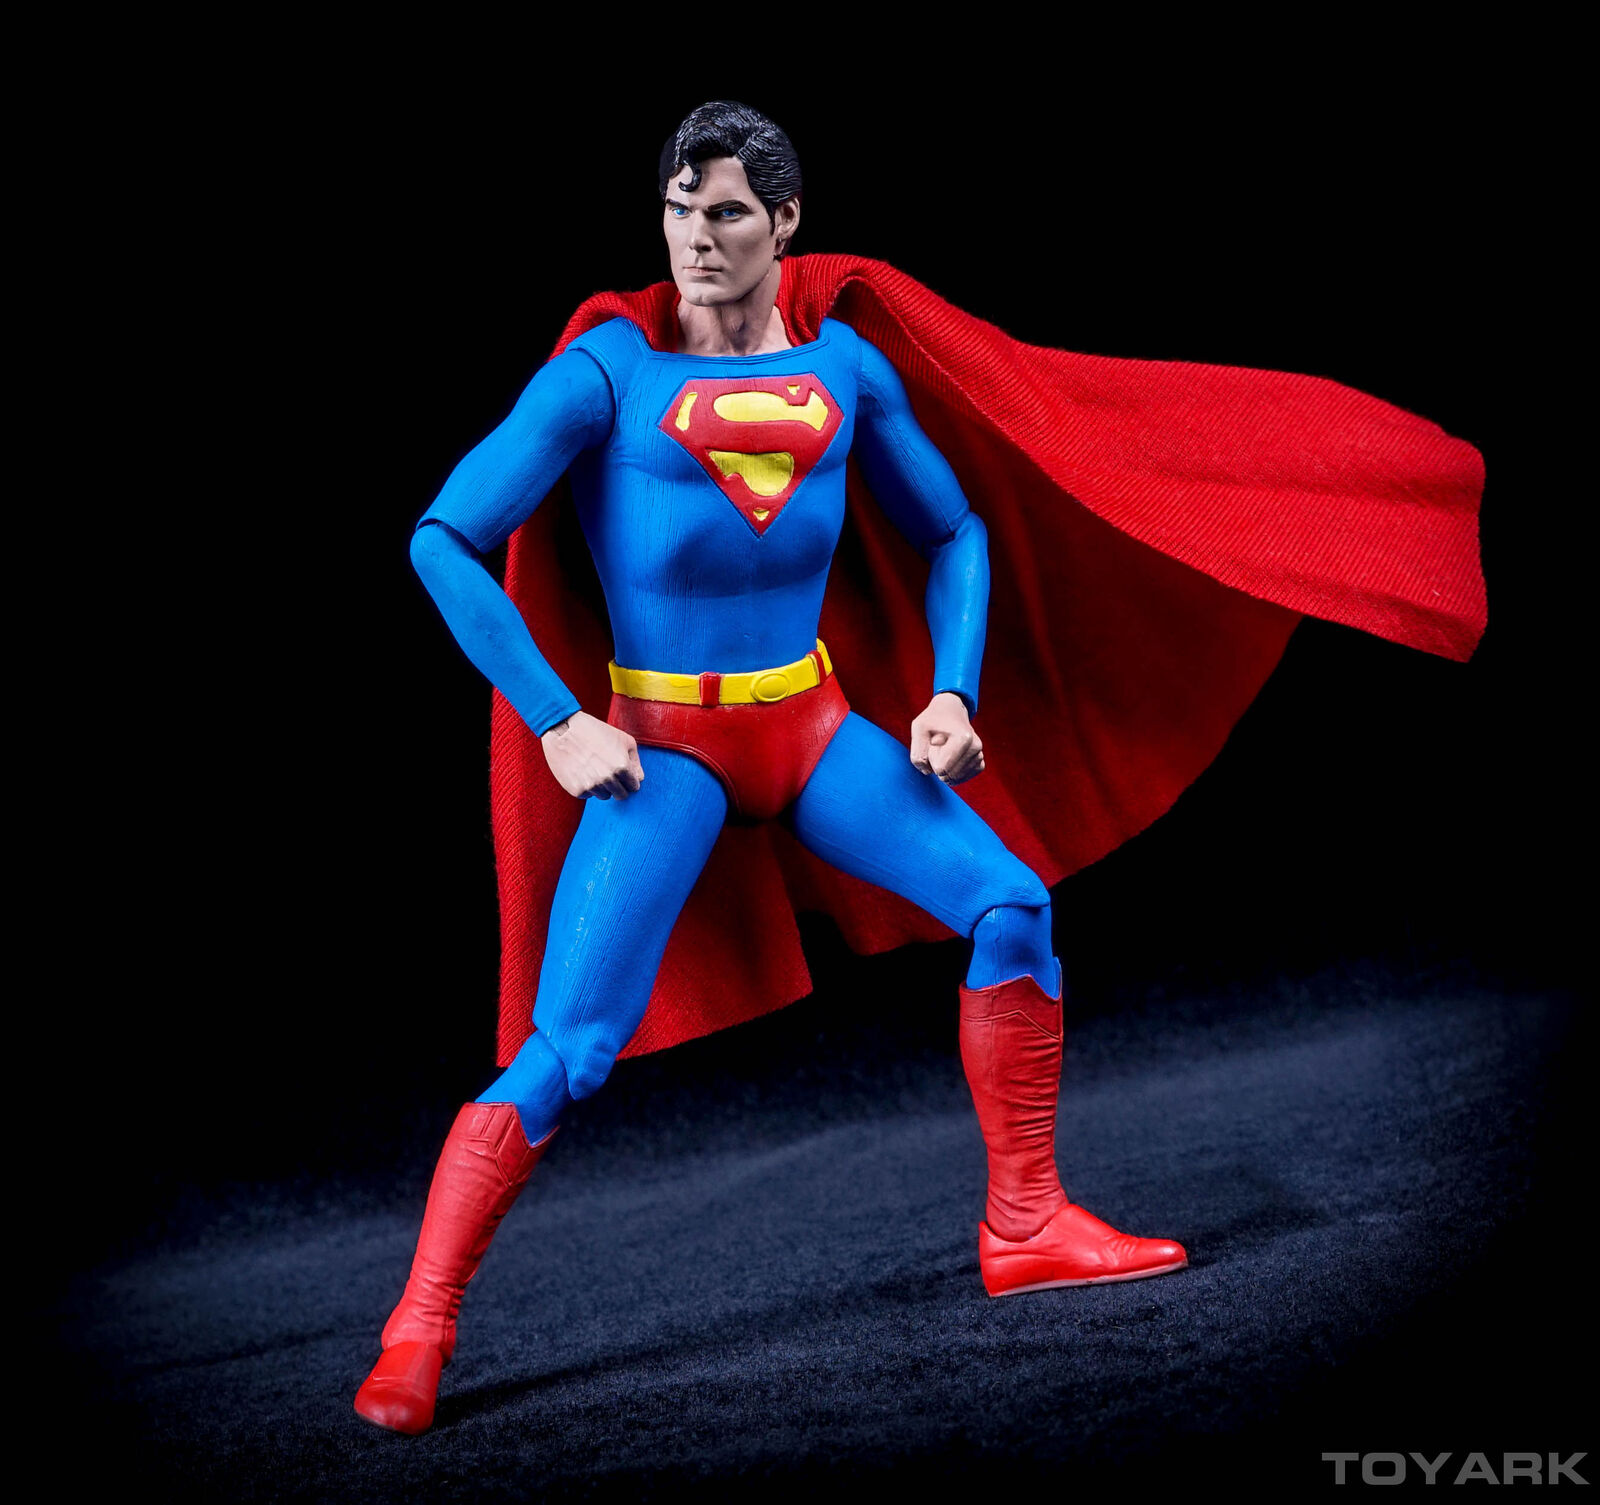 1978 Superman Christopher Reeve Version Action Figure DC Comics Toy New 7in+++